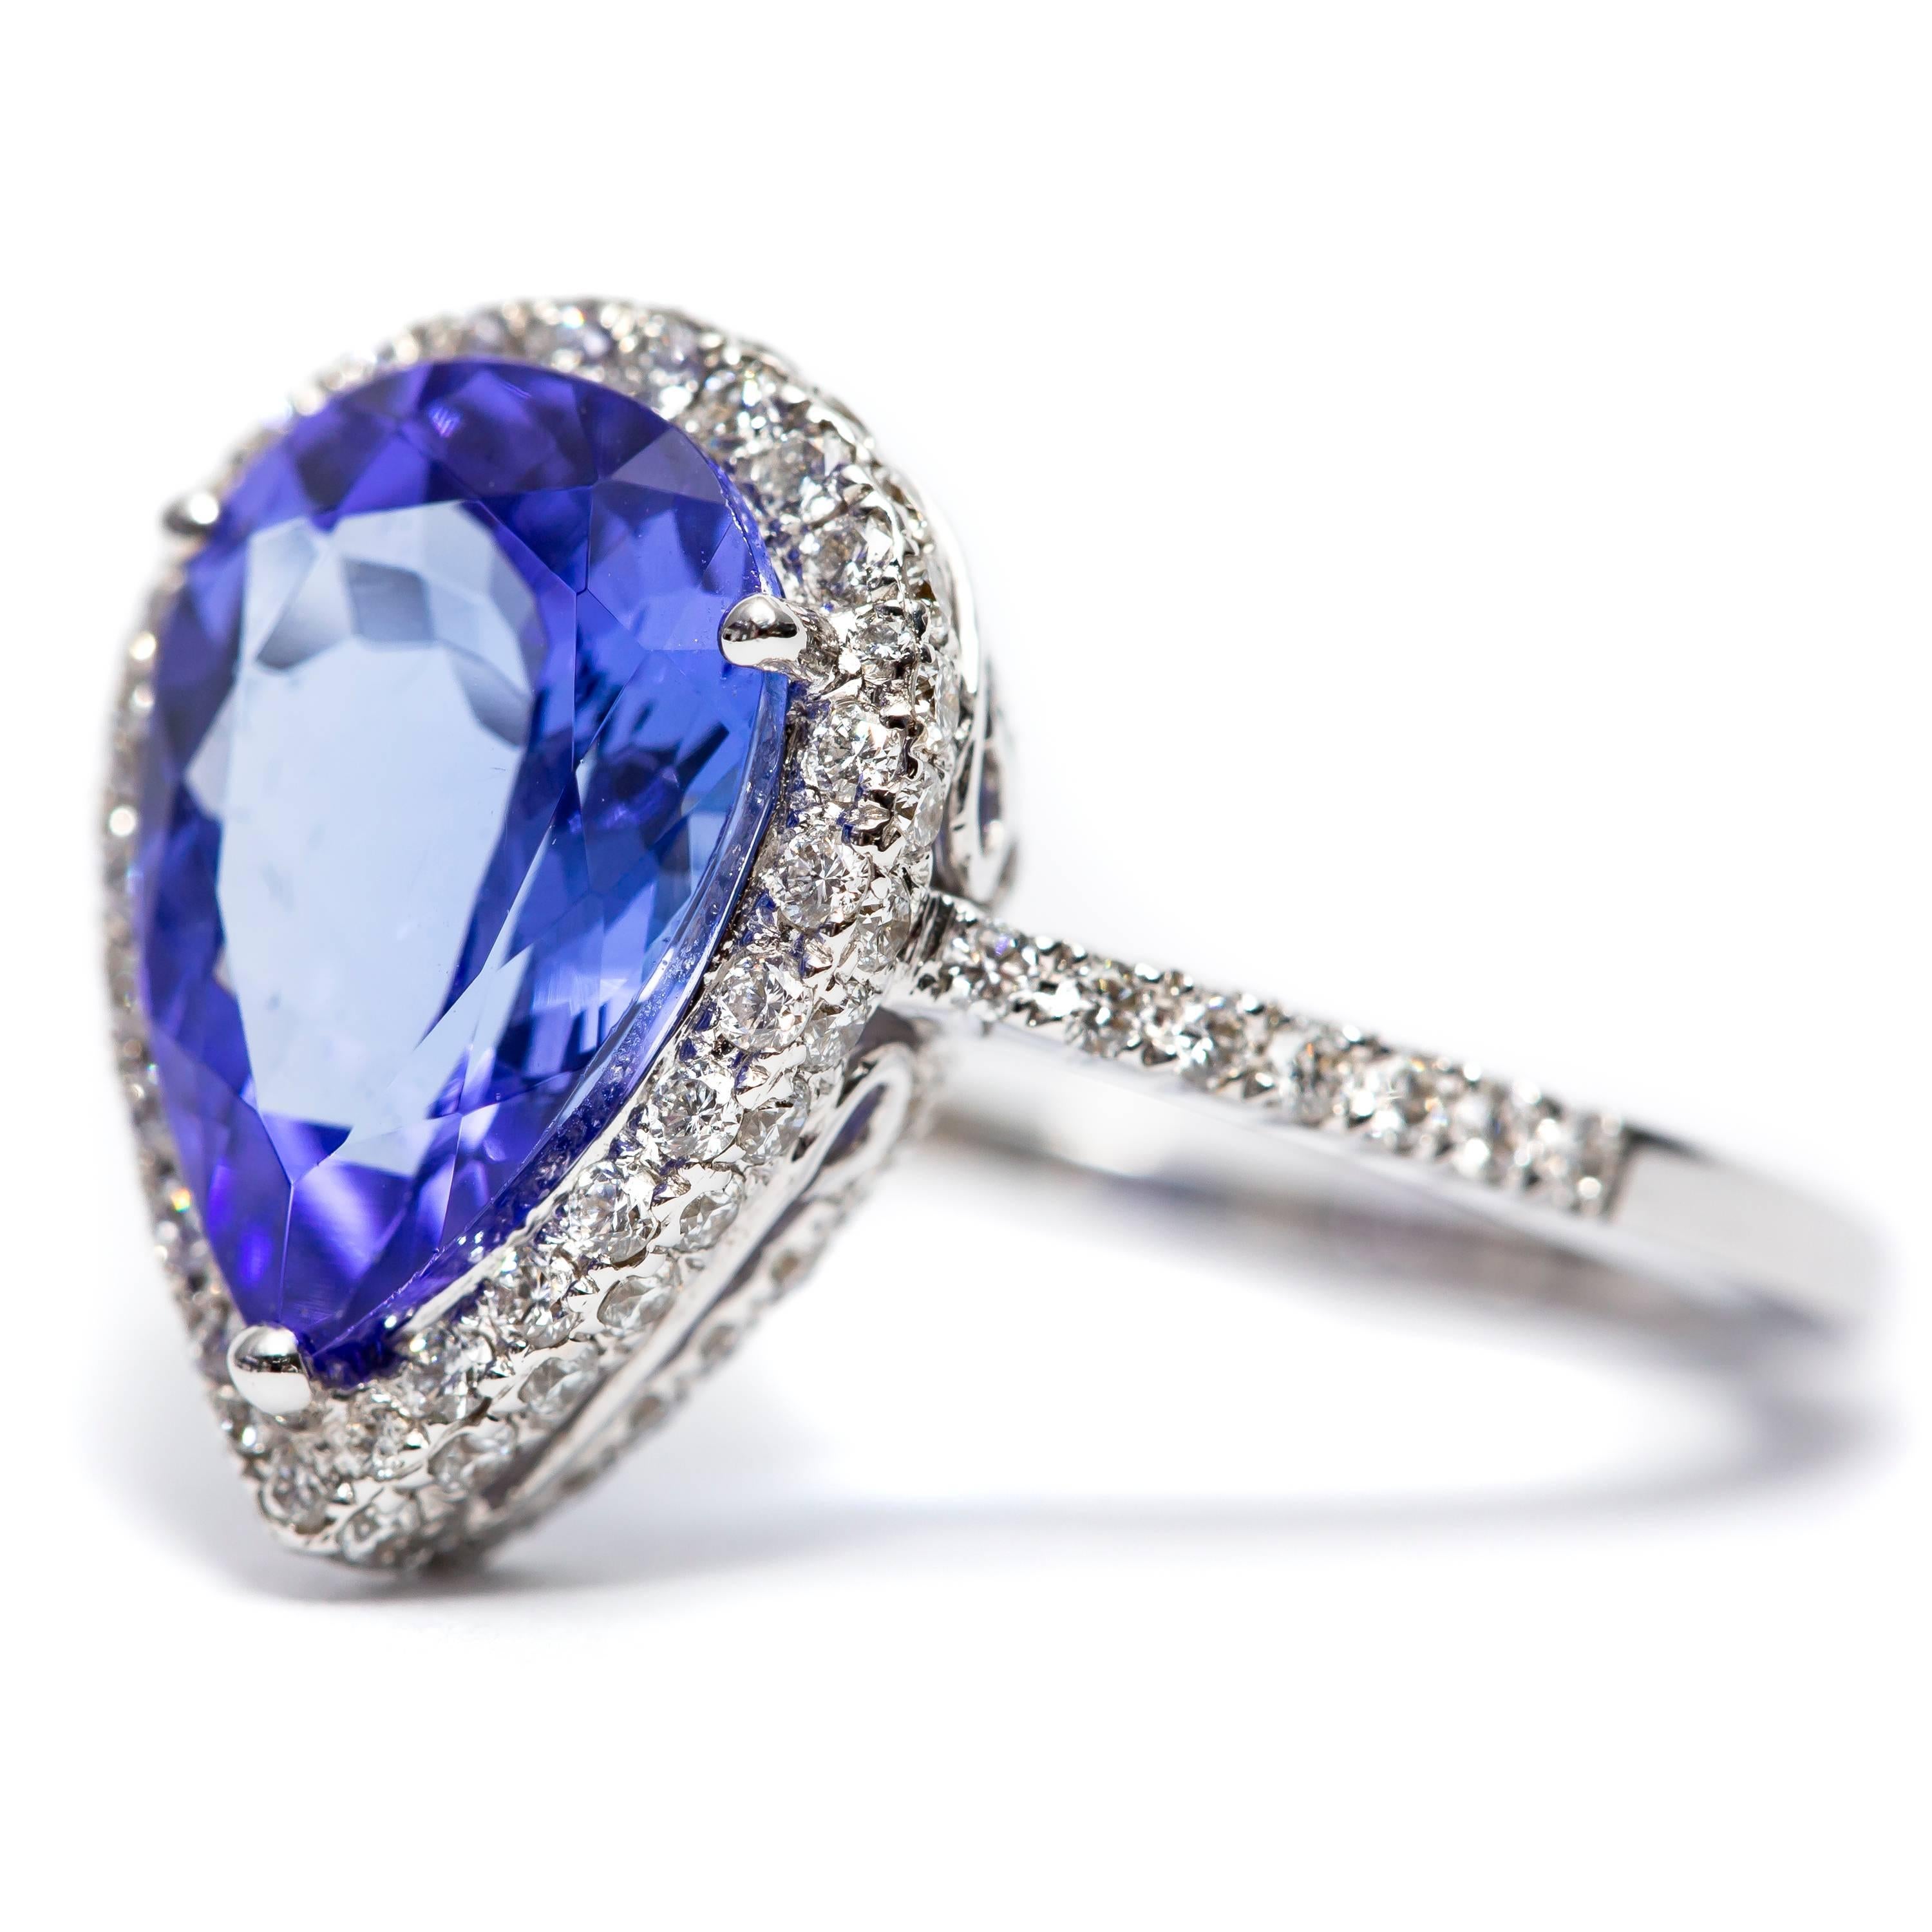 A beautiful 3.26 Carat Pear shaped Tanzanite halo engagement ring featuring 0.75 Carats of white Color G Clarity VS1 Round Brilliant Cut Diamonds. Set in 18 Karat White Gold. 
UK size - N, US size - 7 available in other carat sizes as well as ring